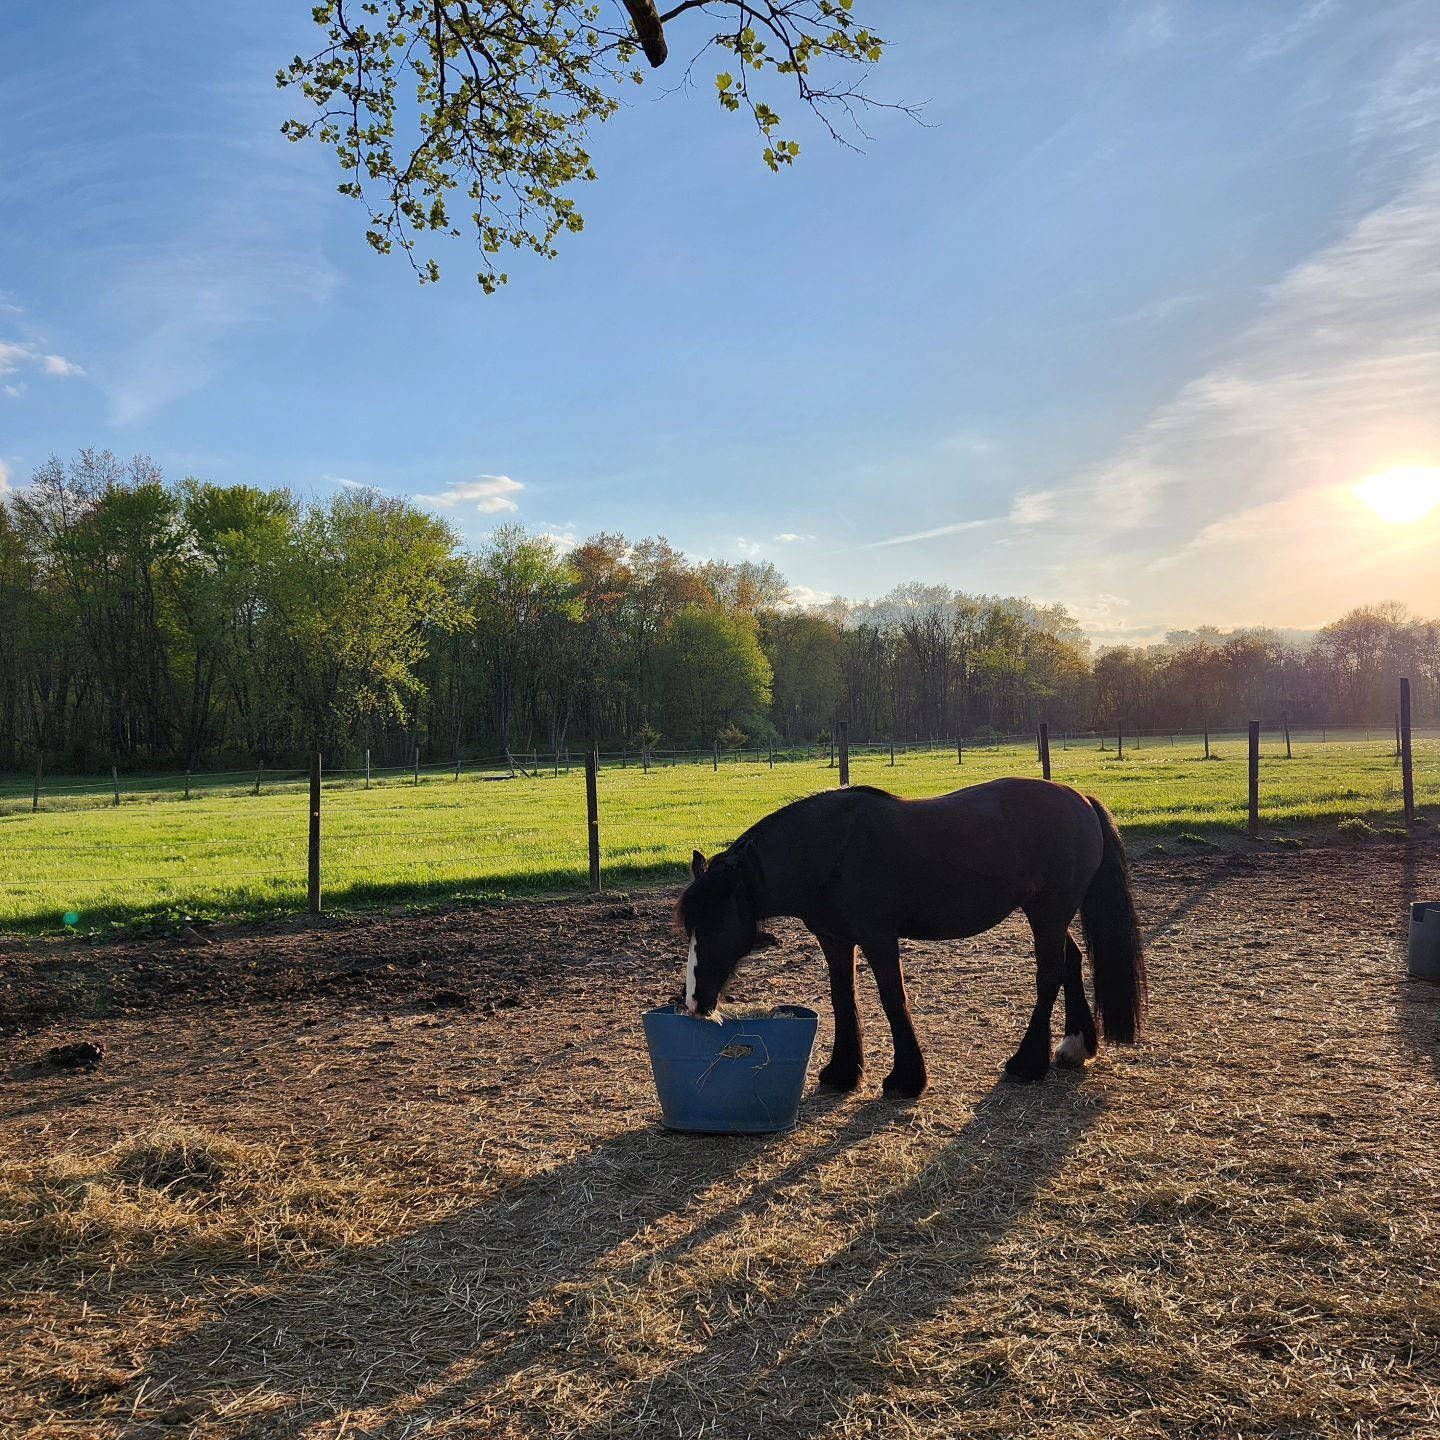 Rikki knows how to bask in a beautiful spring evening for sure! ☀️🐴